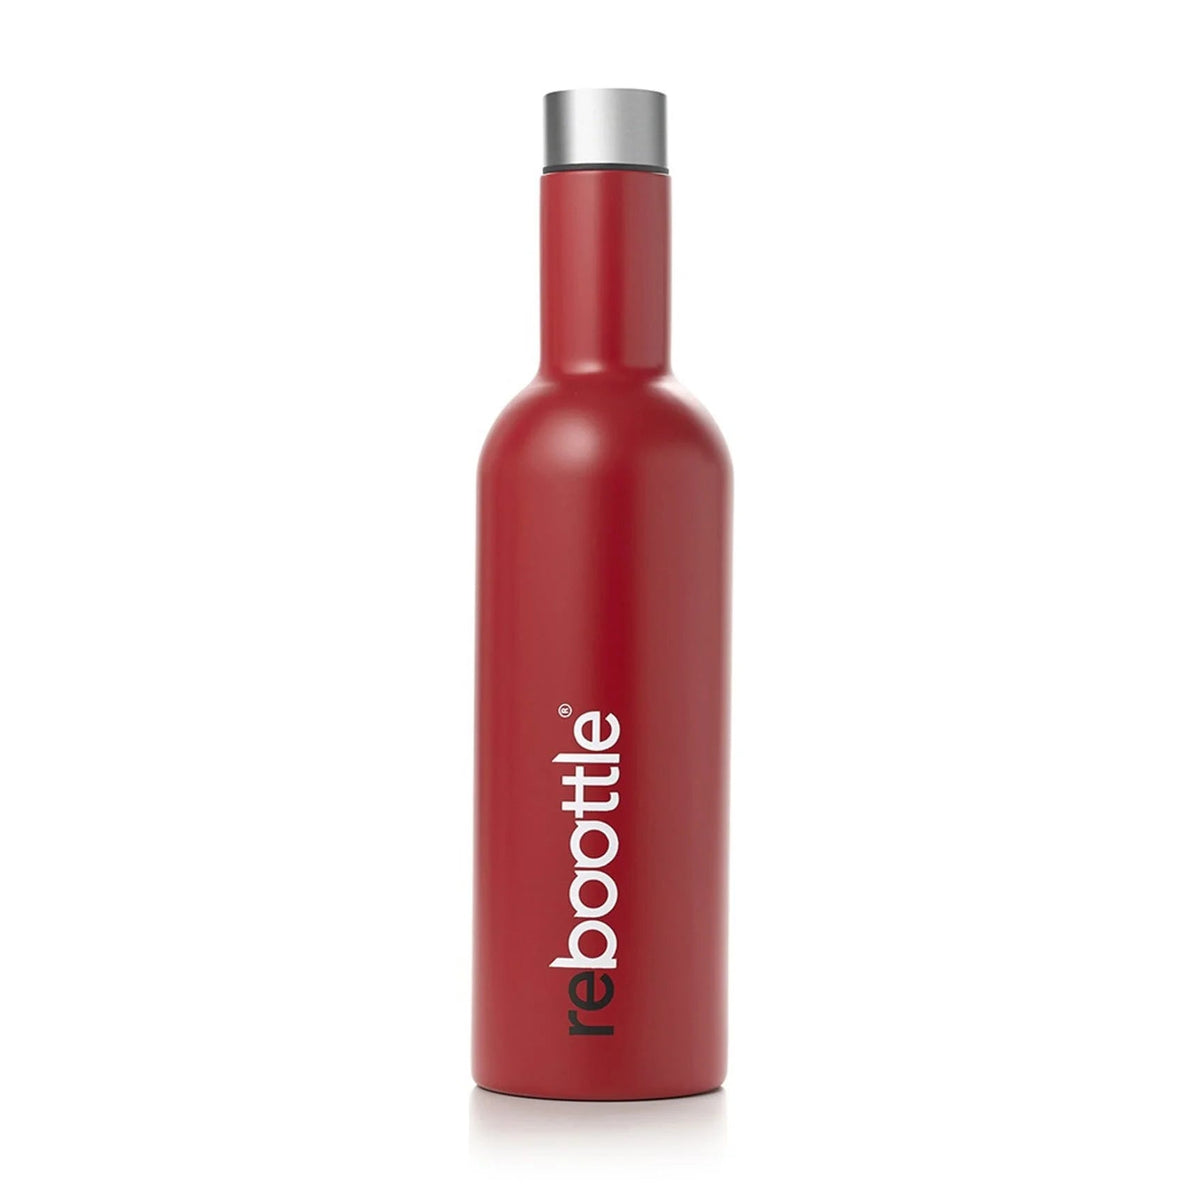 Rebootle Insulated Wine Bottle Flask - Red - The Mewstone Candle Co